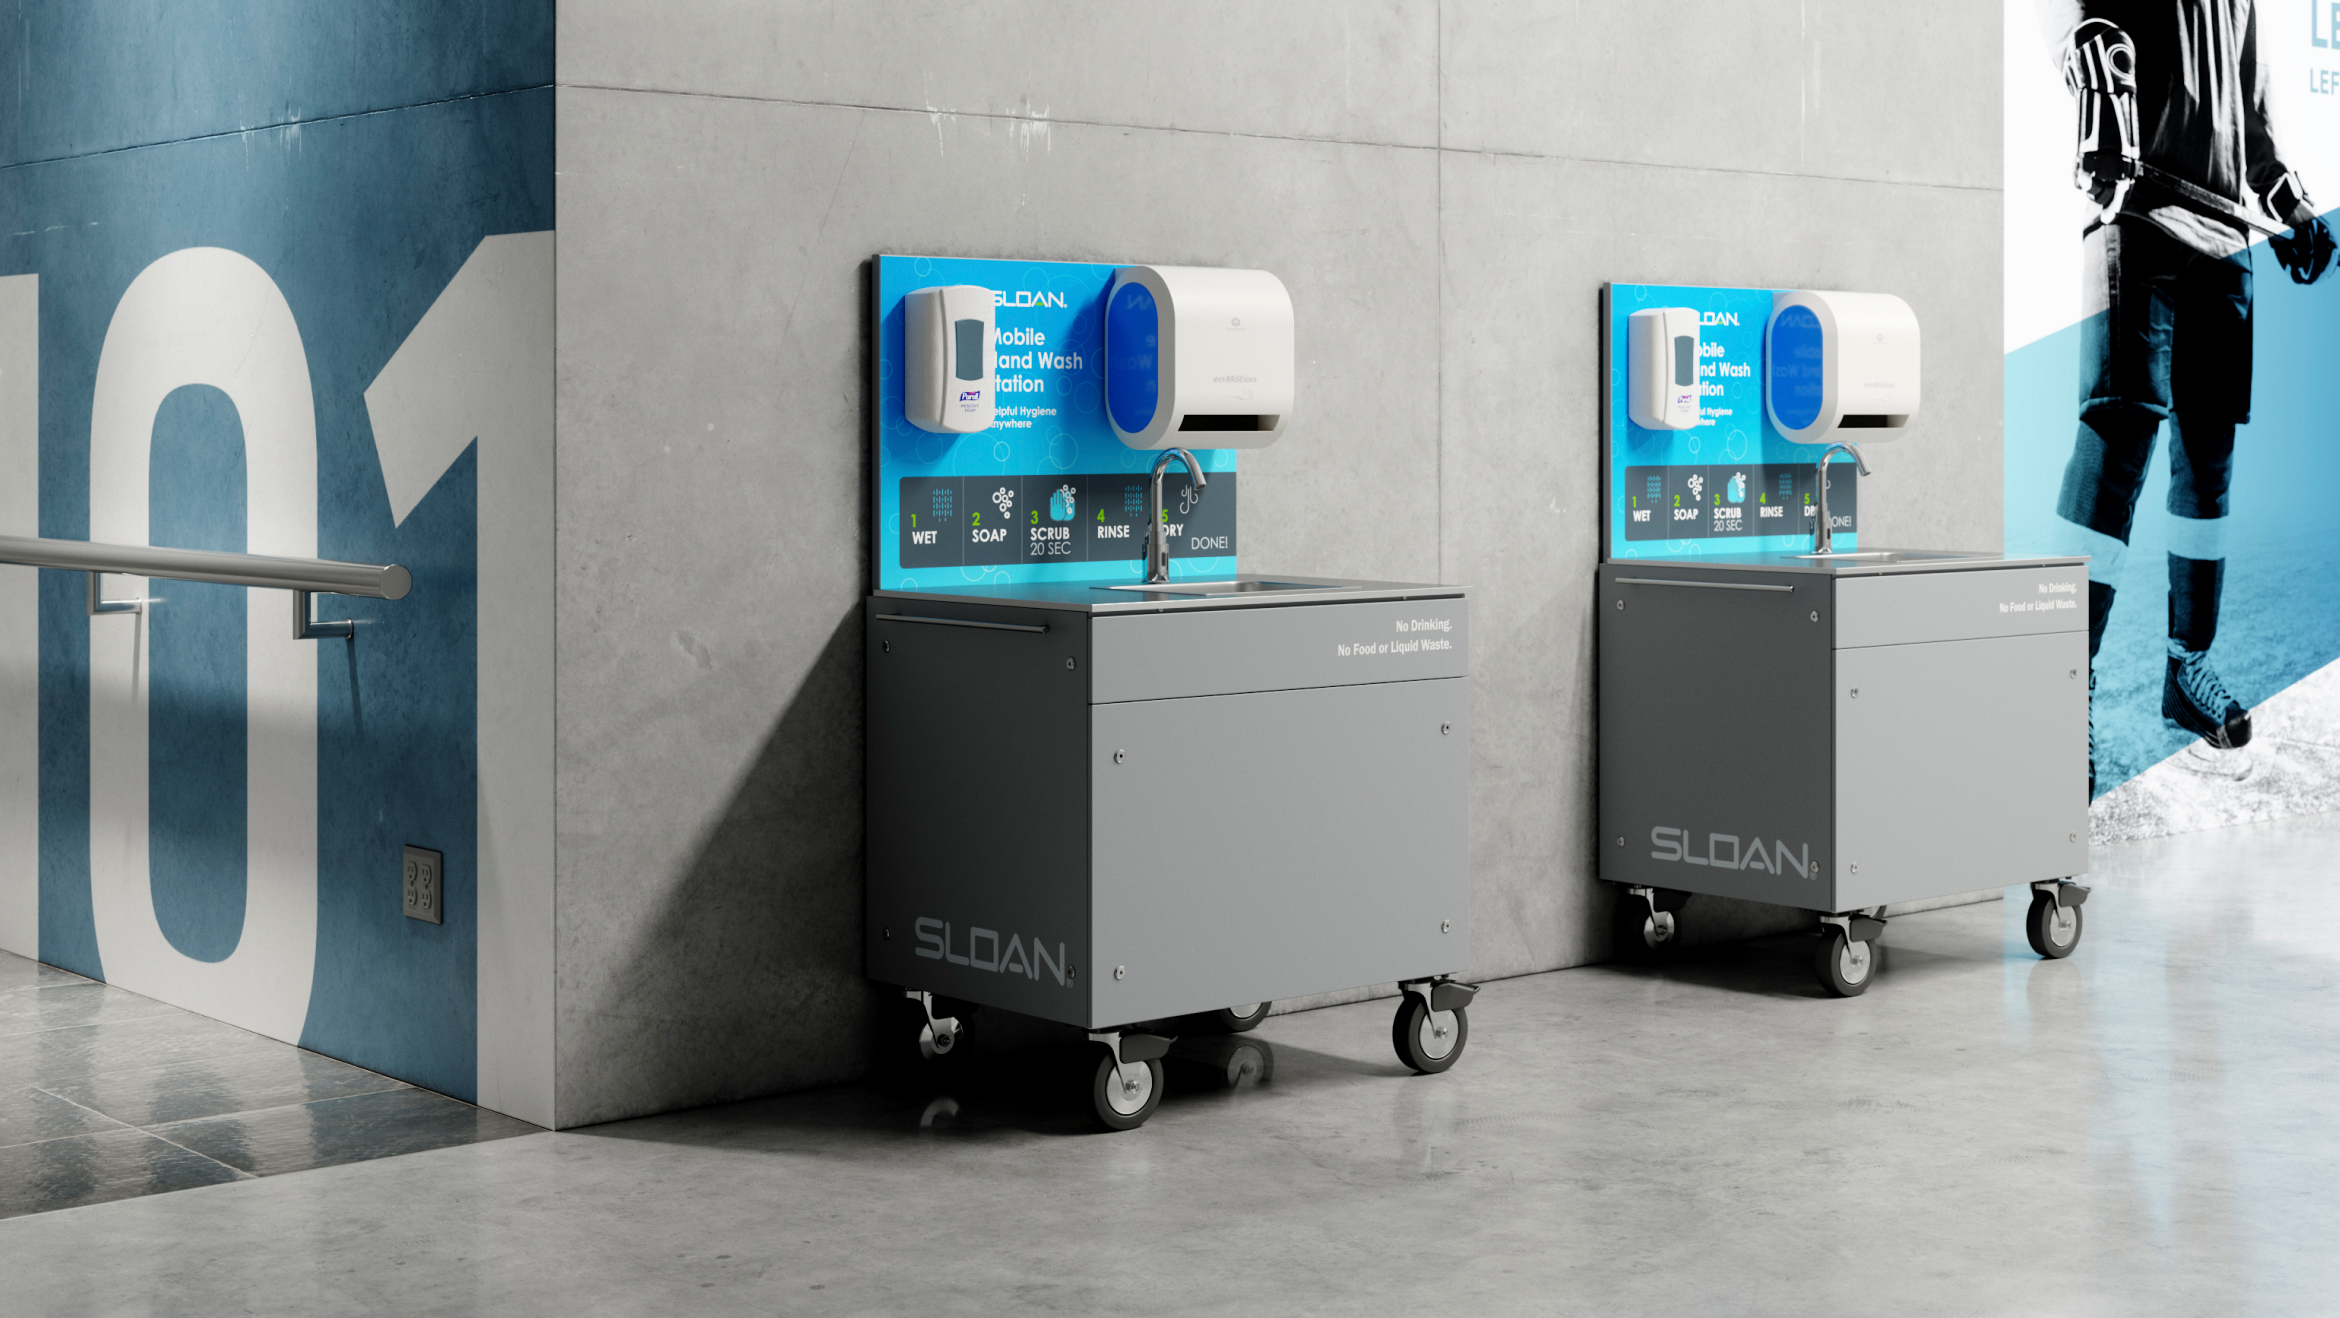 Sloan mobile handwashing in airports and stadiums